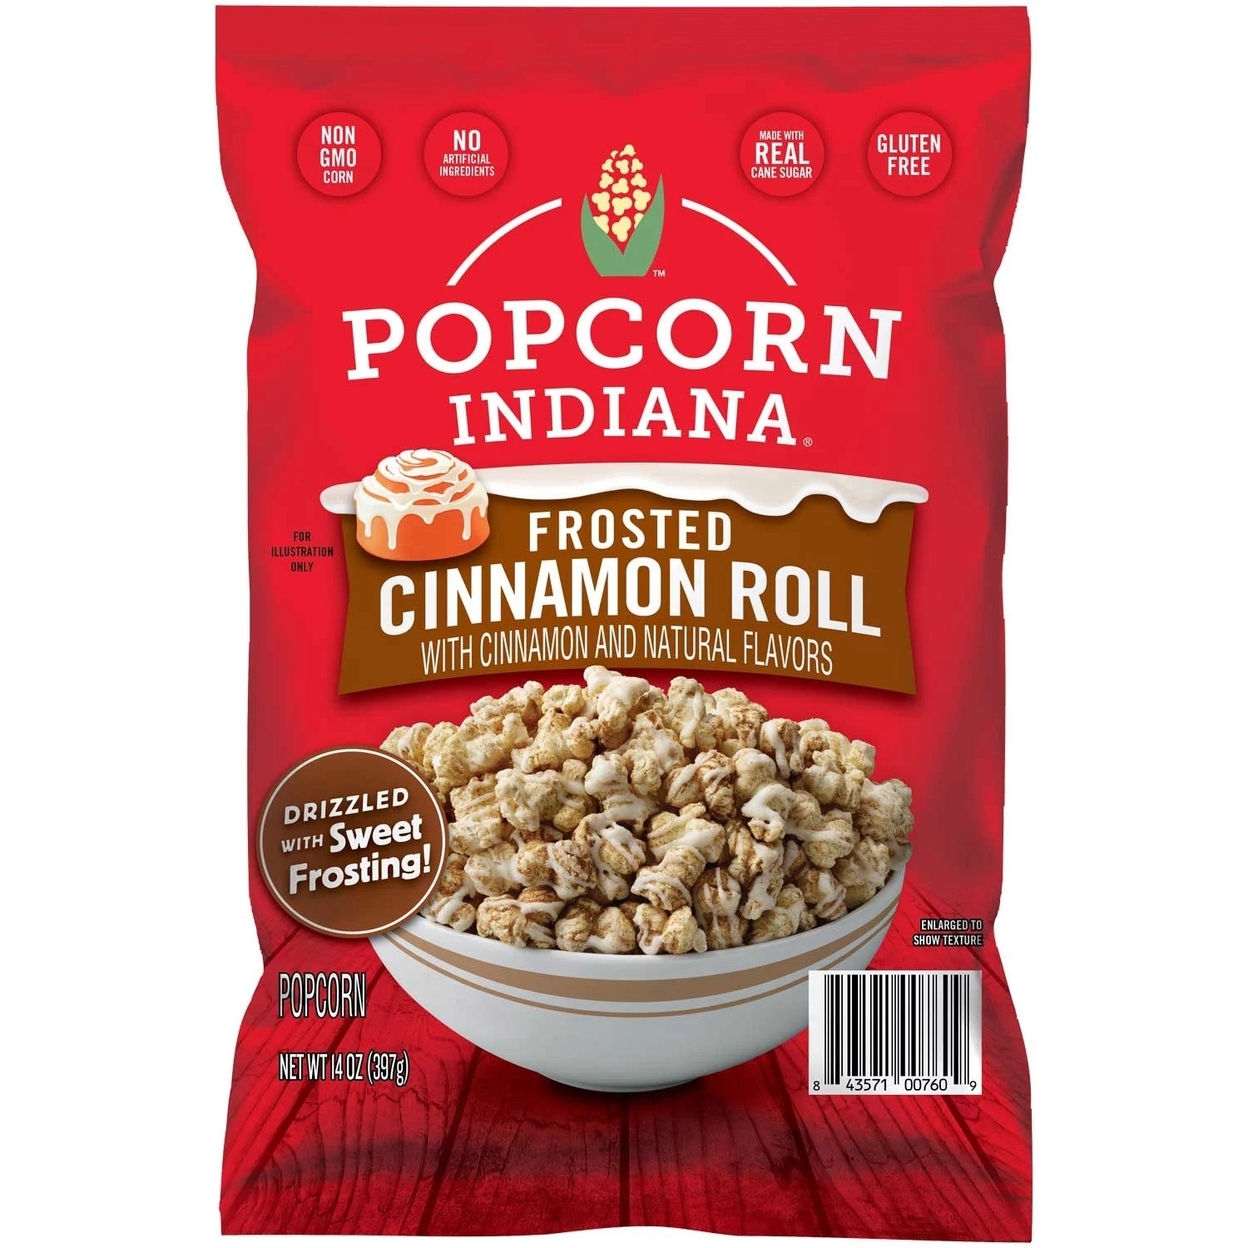 Popcorn Indiana Frosted Cinnamon Roll Popcorn (14 Ounce)